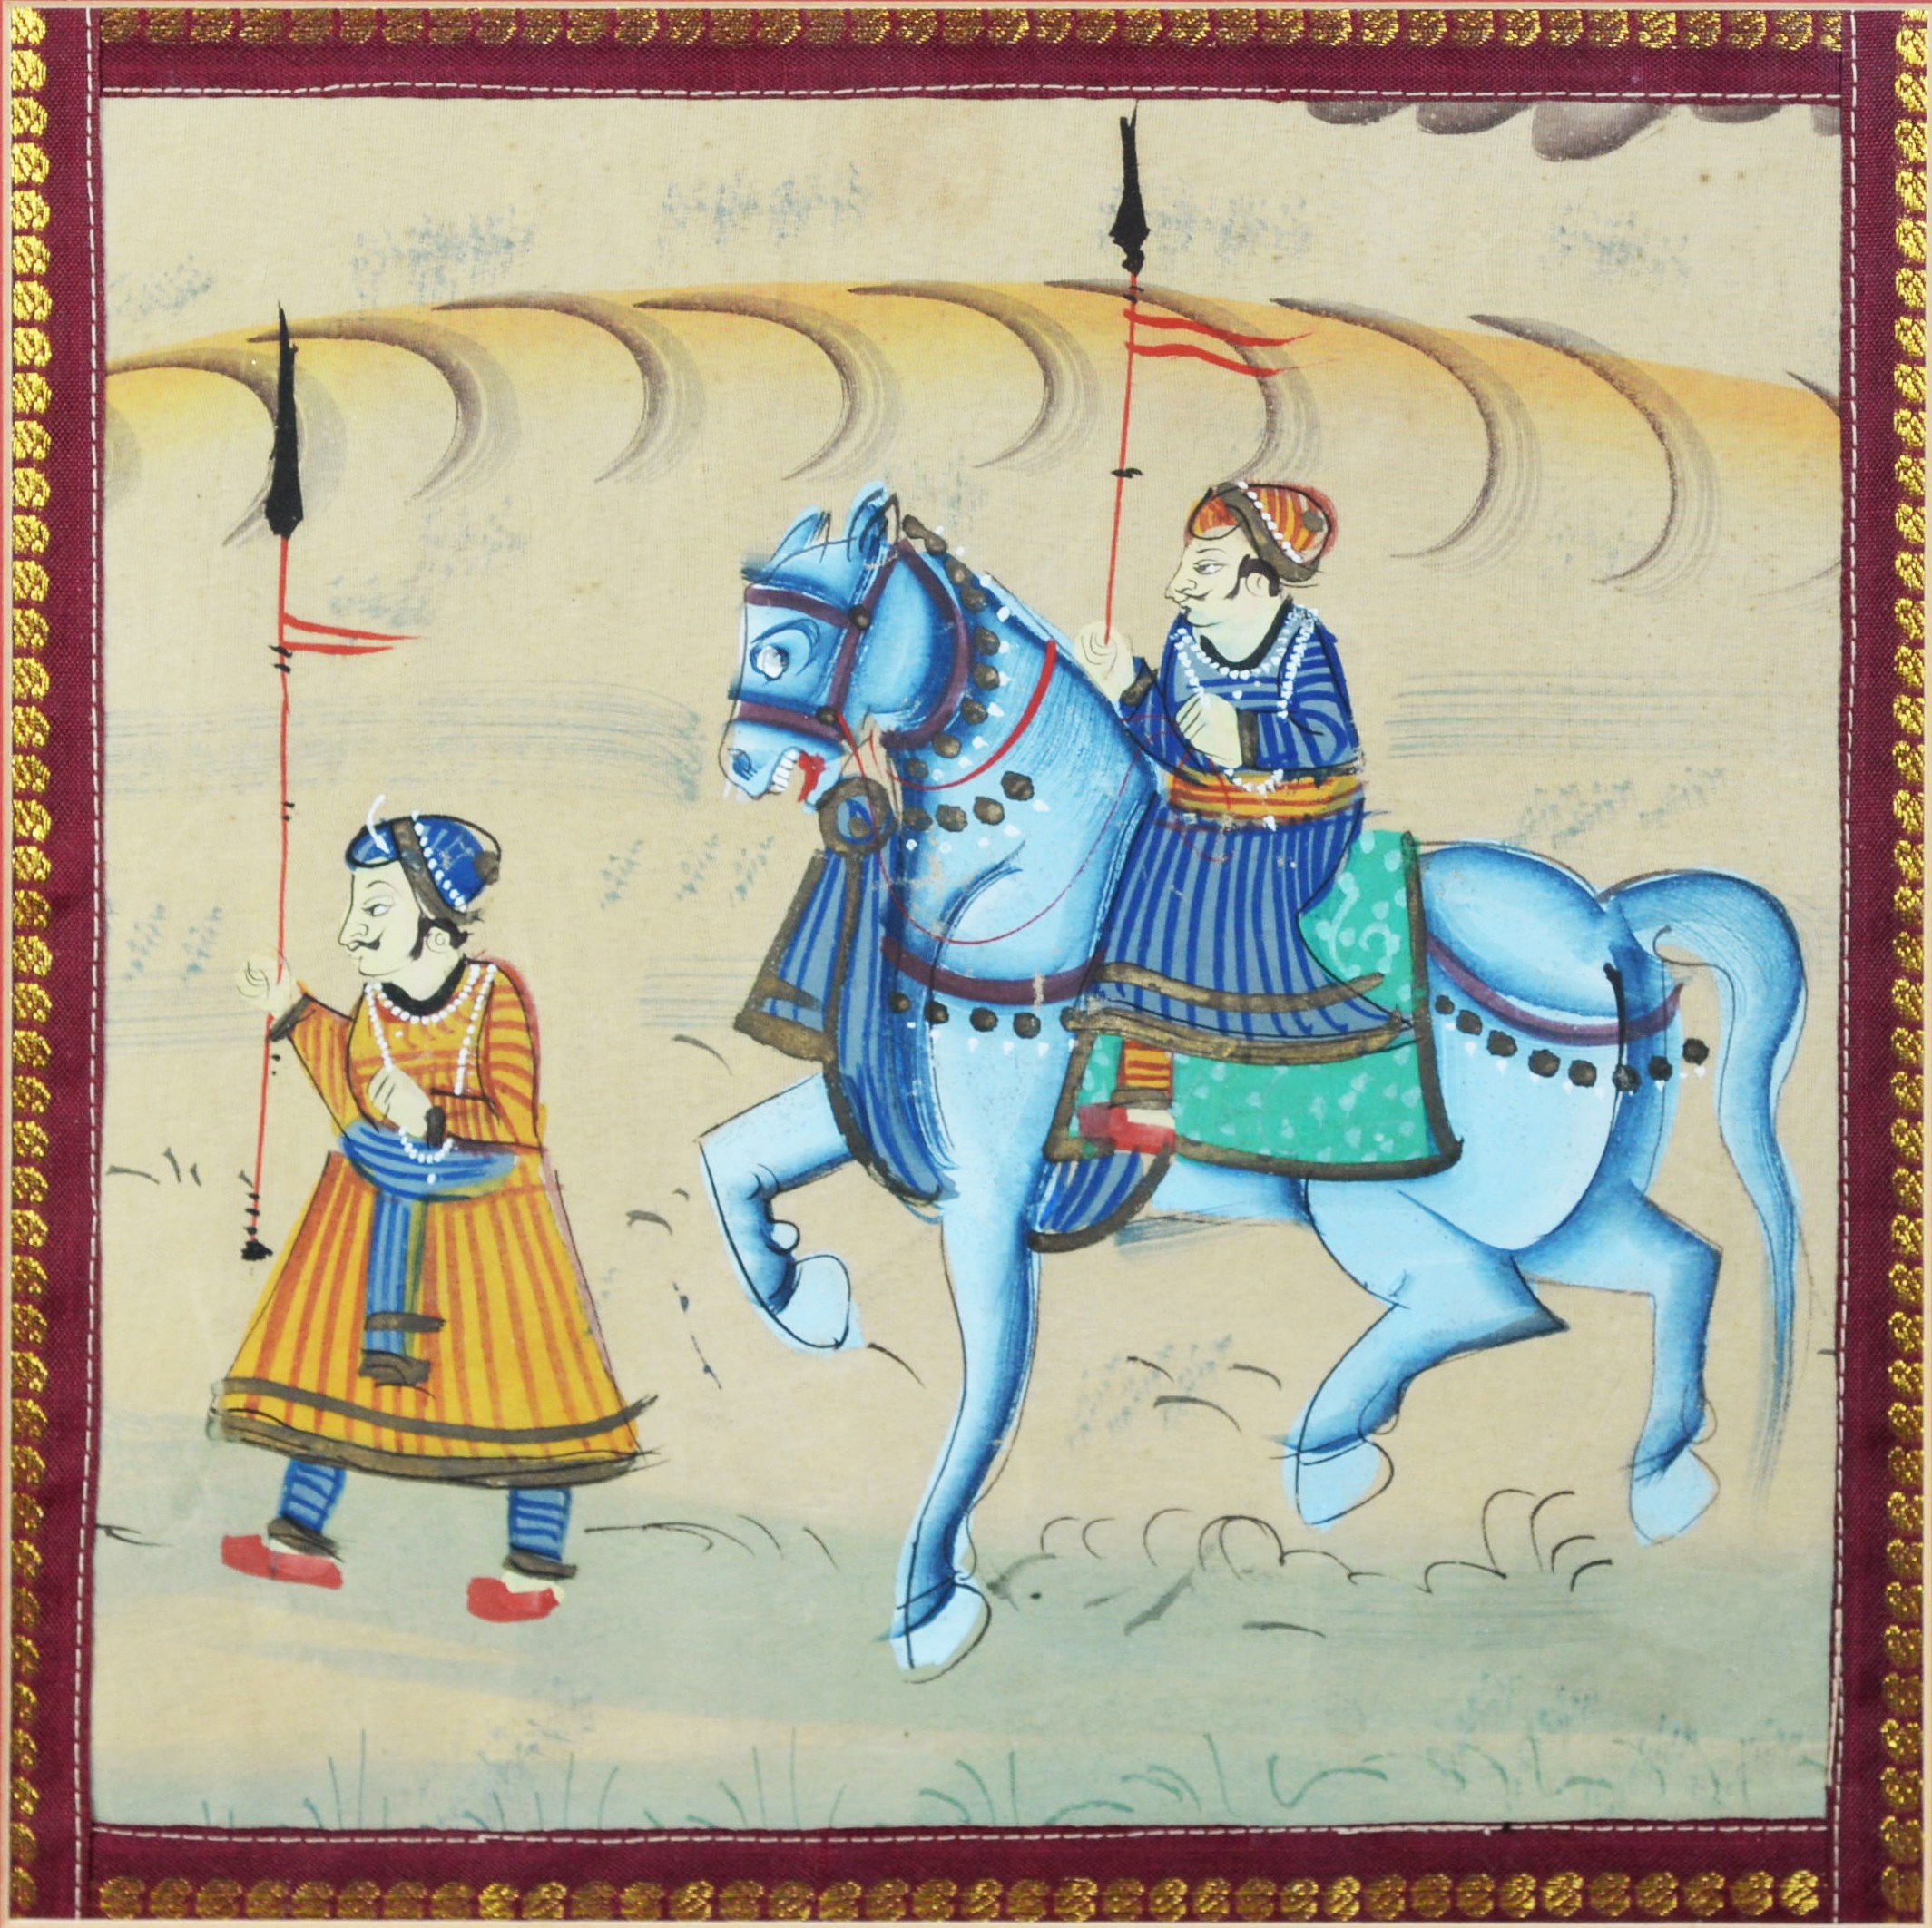 PAIR OF INDIAN GOUACHE DRAWINGS ON PAPER, EACH OF TWO WARRIORS, ONE ON HORSEBACK, within embroidered - Image 3 of 8